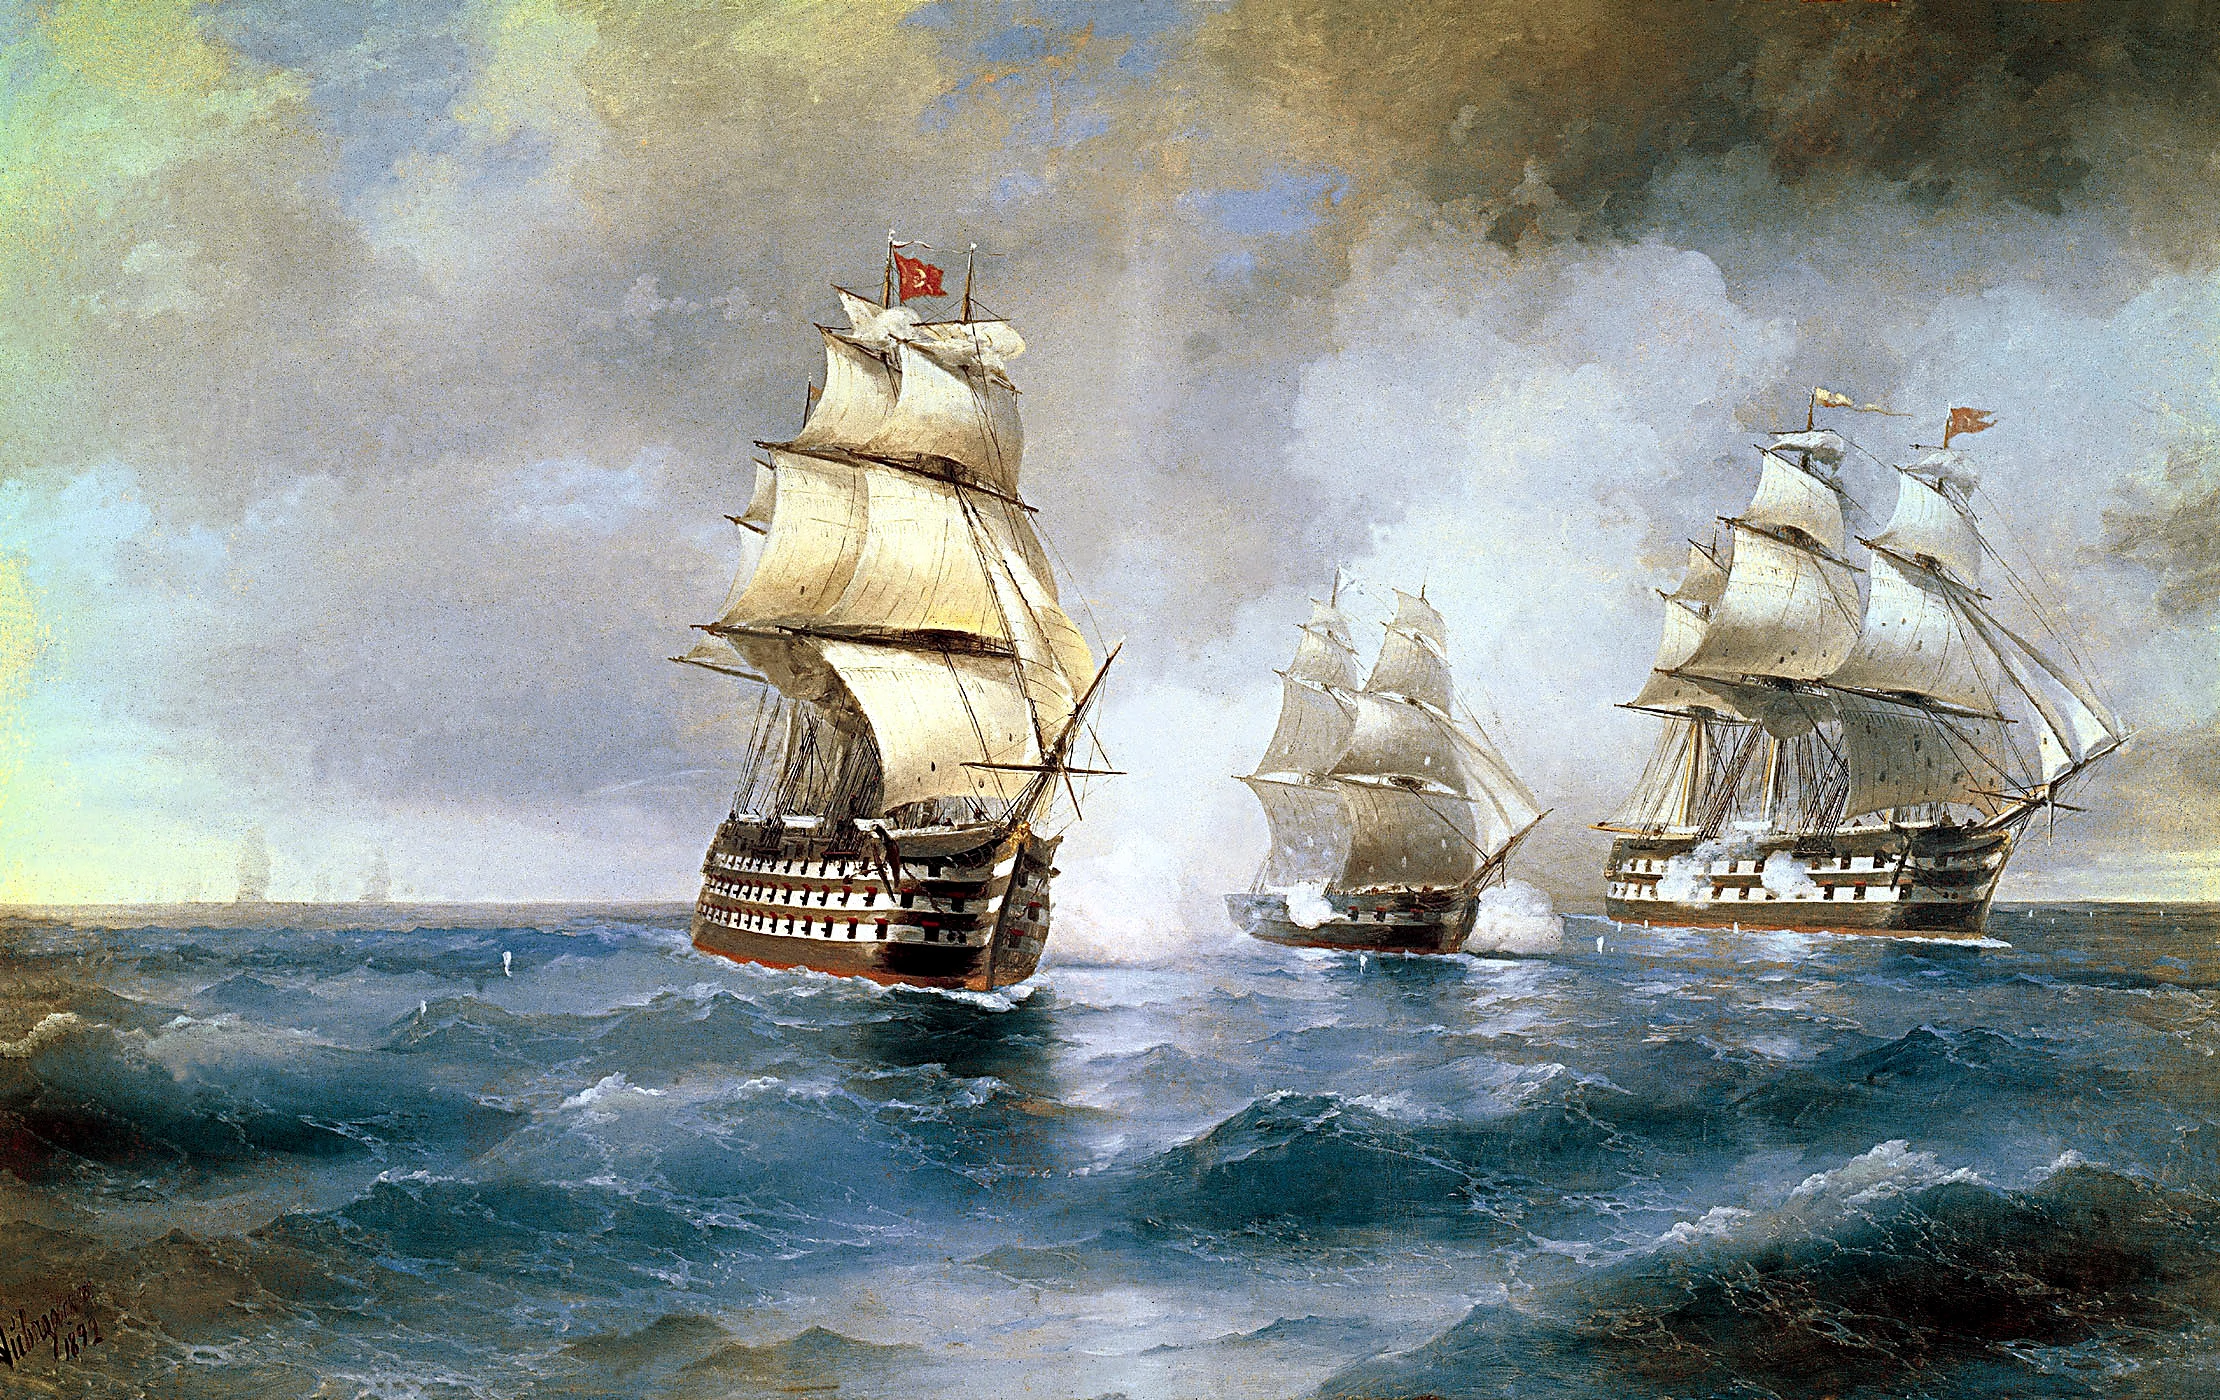 Brig "Mercury" Attacked by Two Turkish Ships, Ivan Aivazovsky